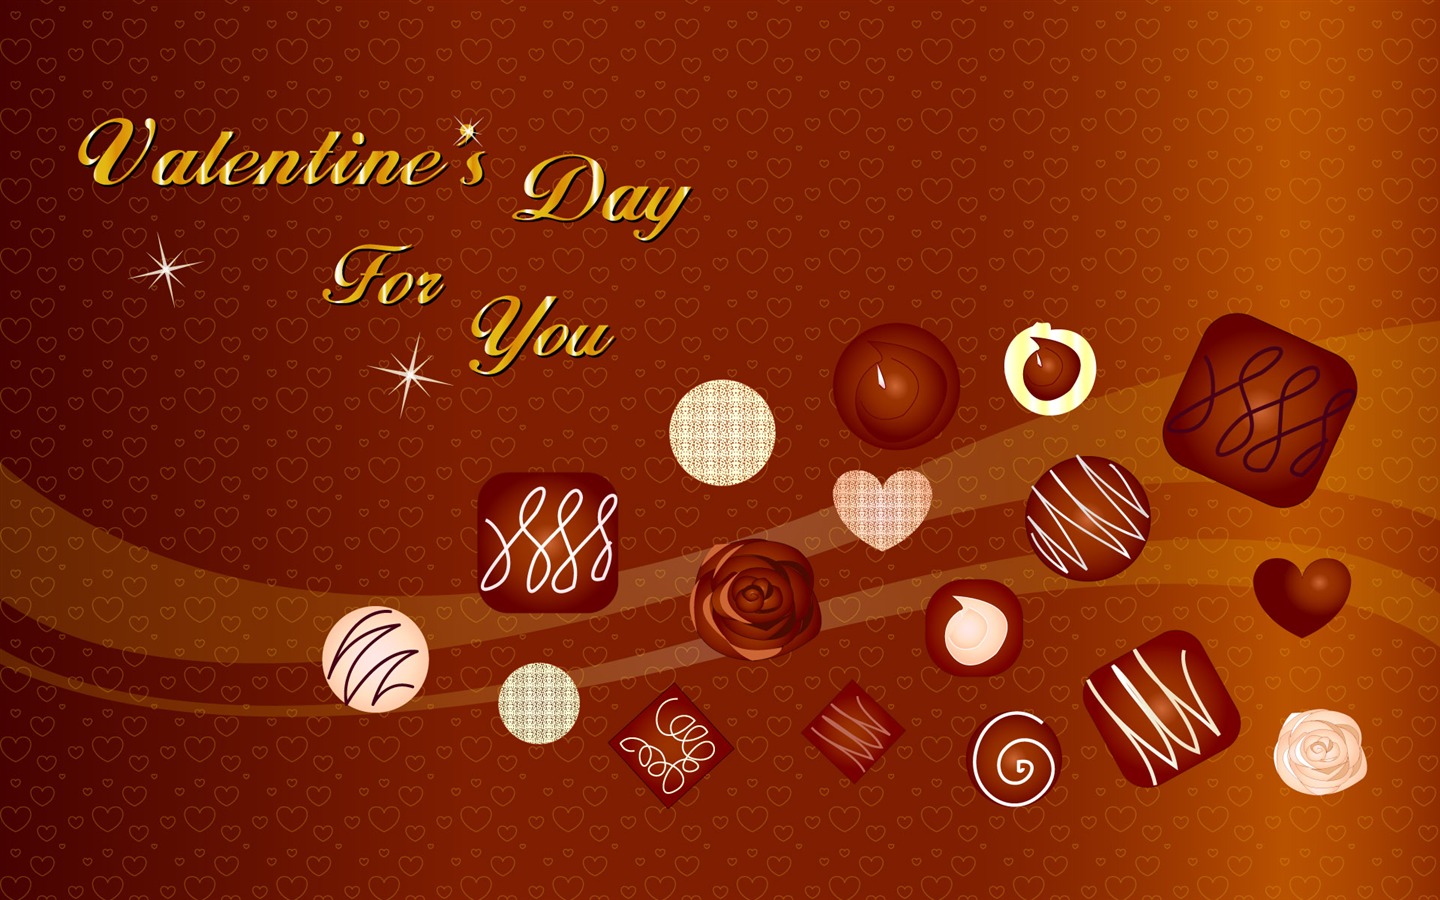 Valentine's Day Theme Wallpapers (1) #3 - 1440x900